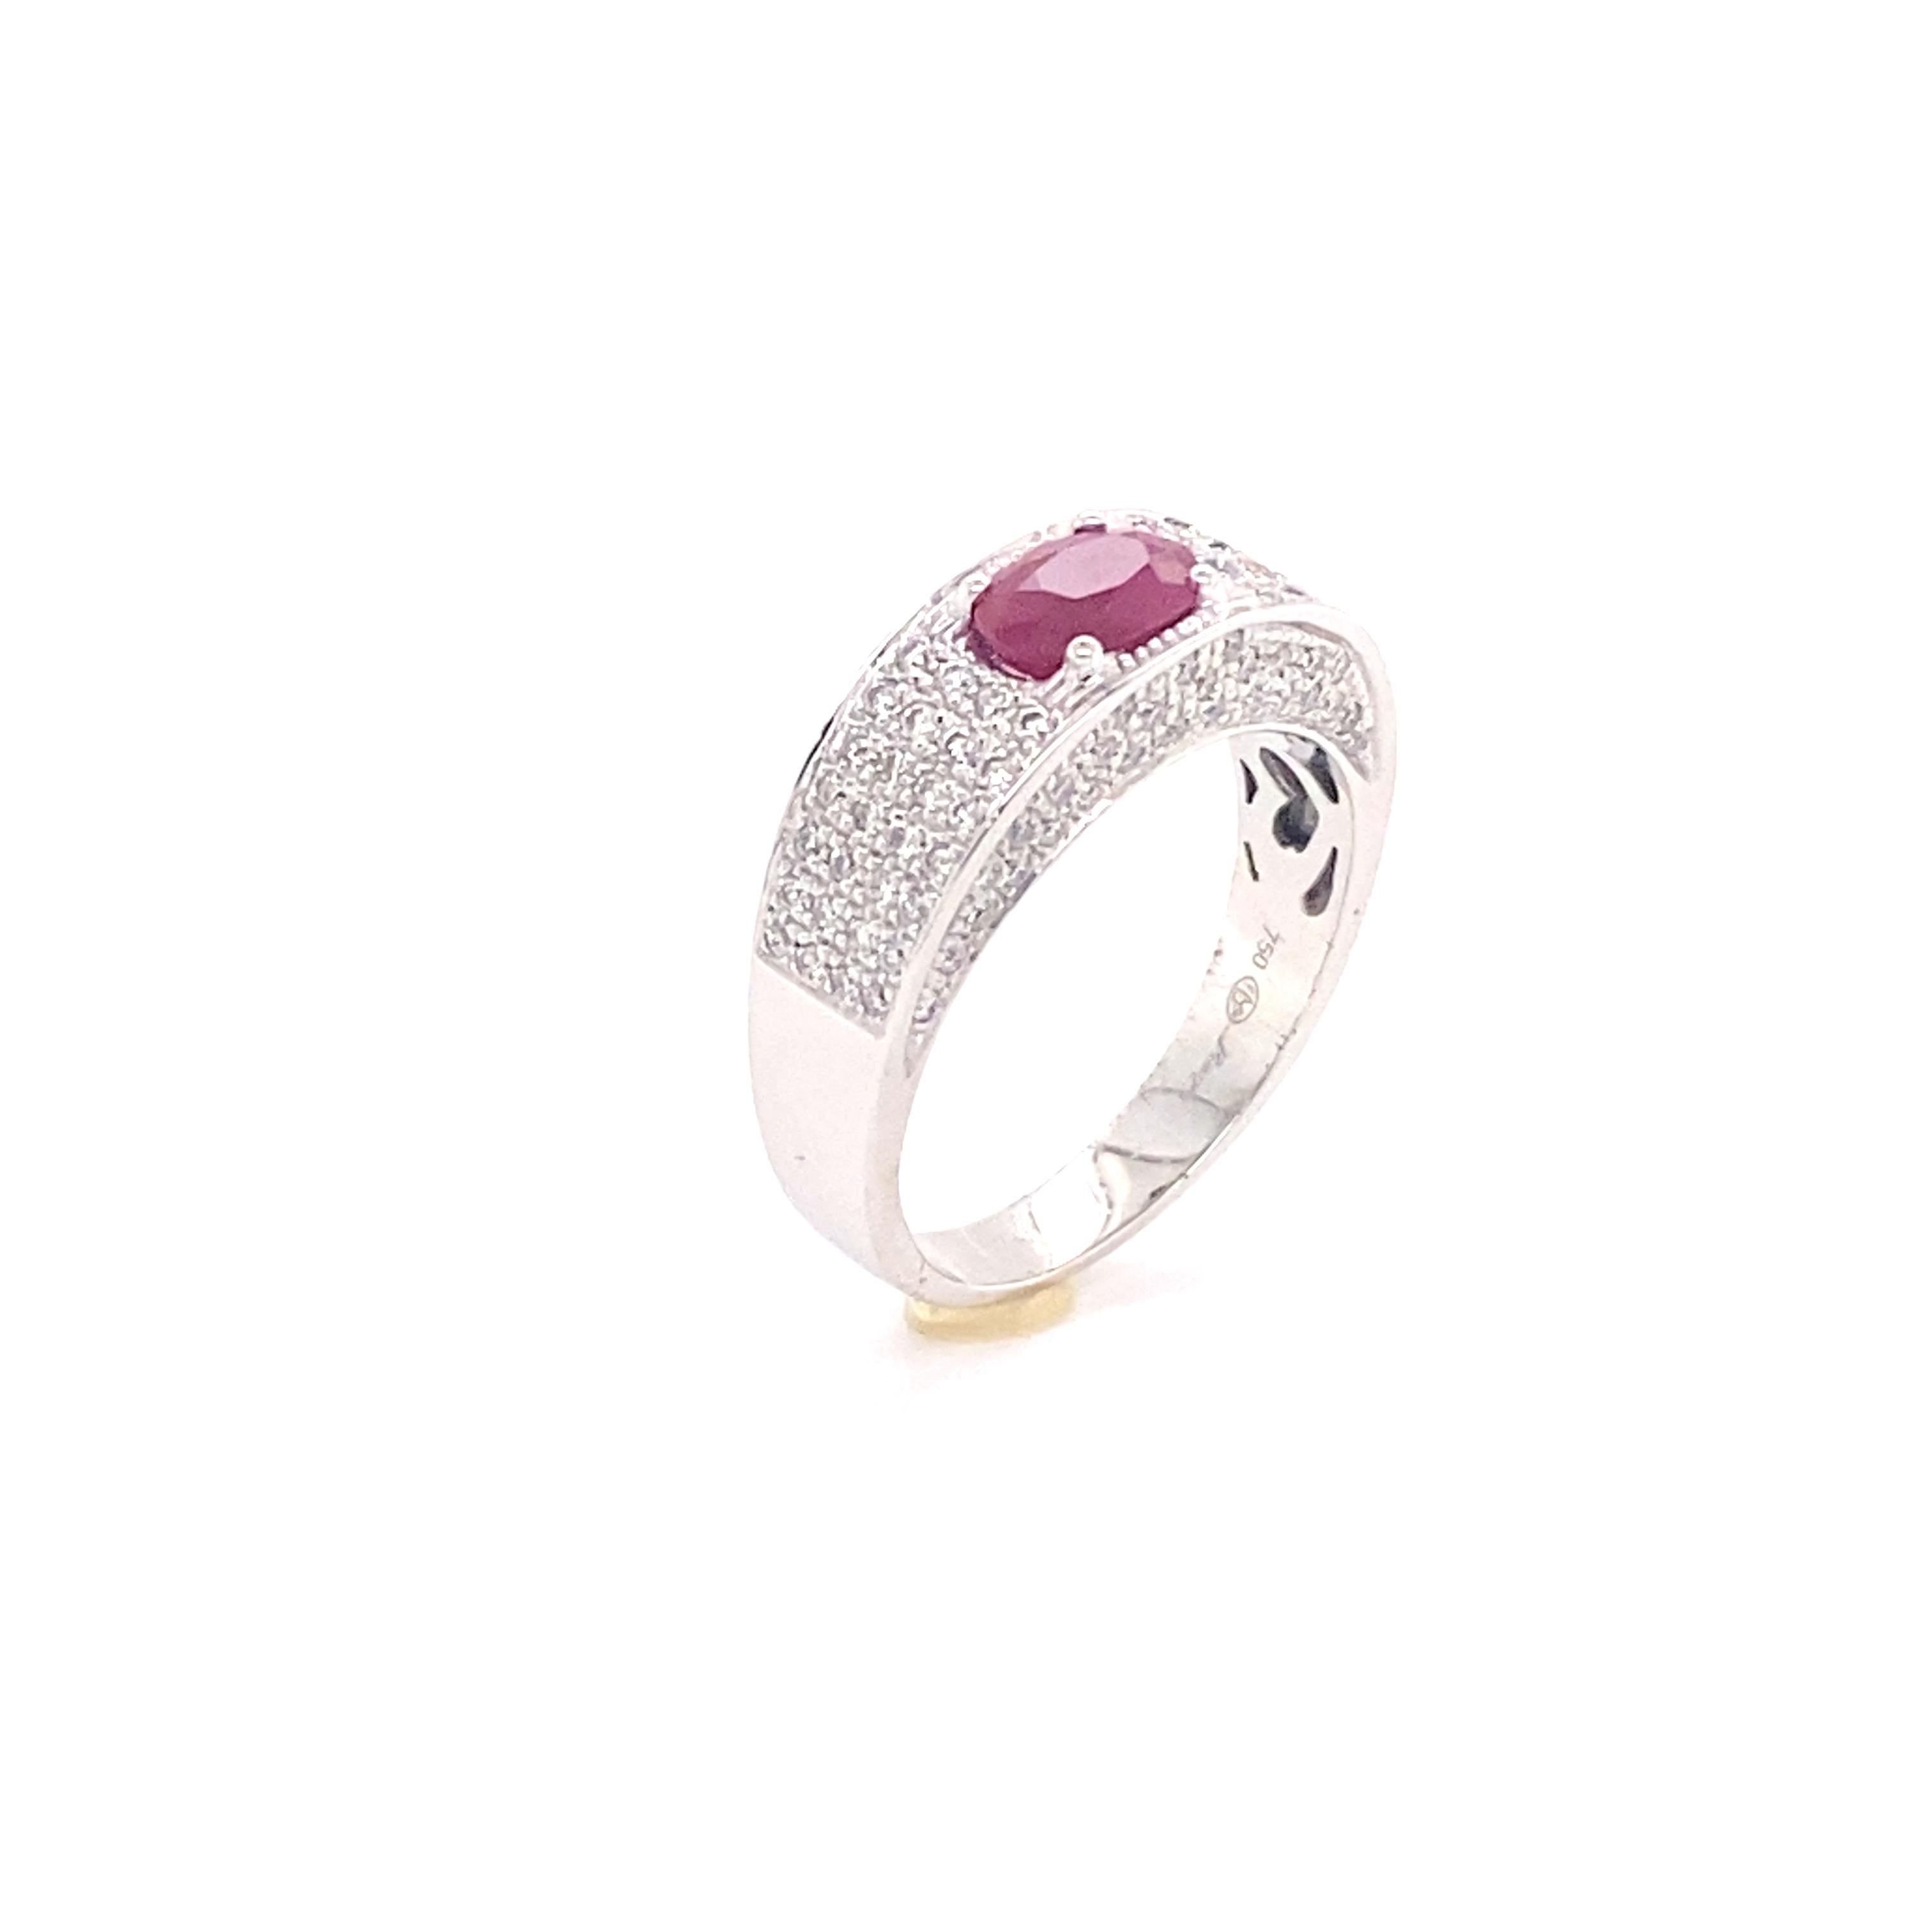 Brilliant Cut Ruby and White Diamonds on White Gold 18 Carat Cocktail Ring